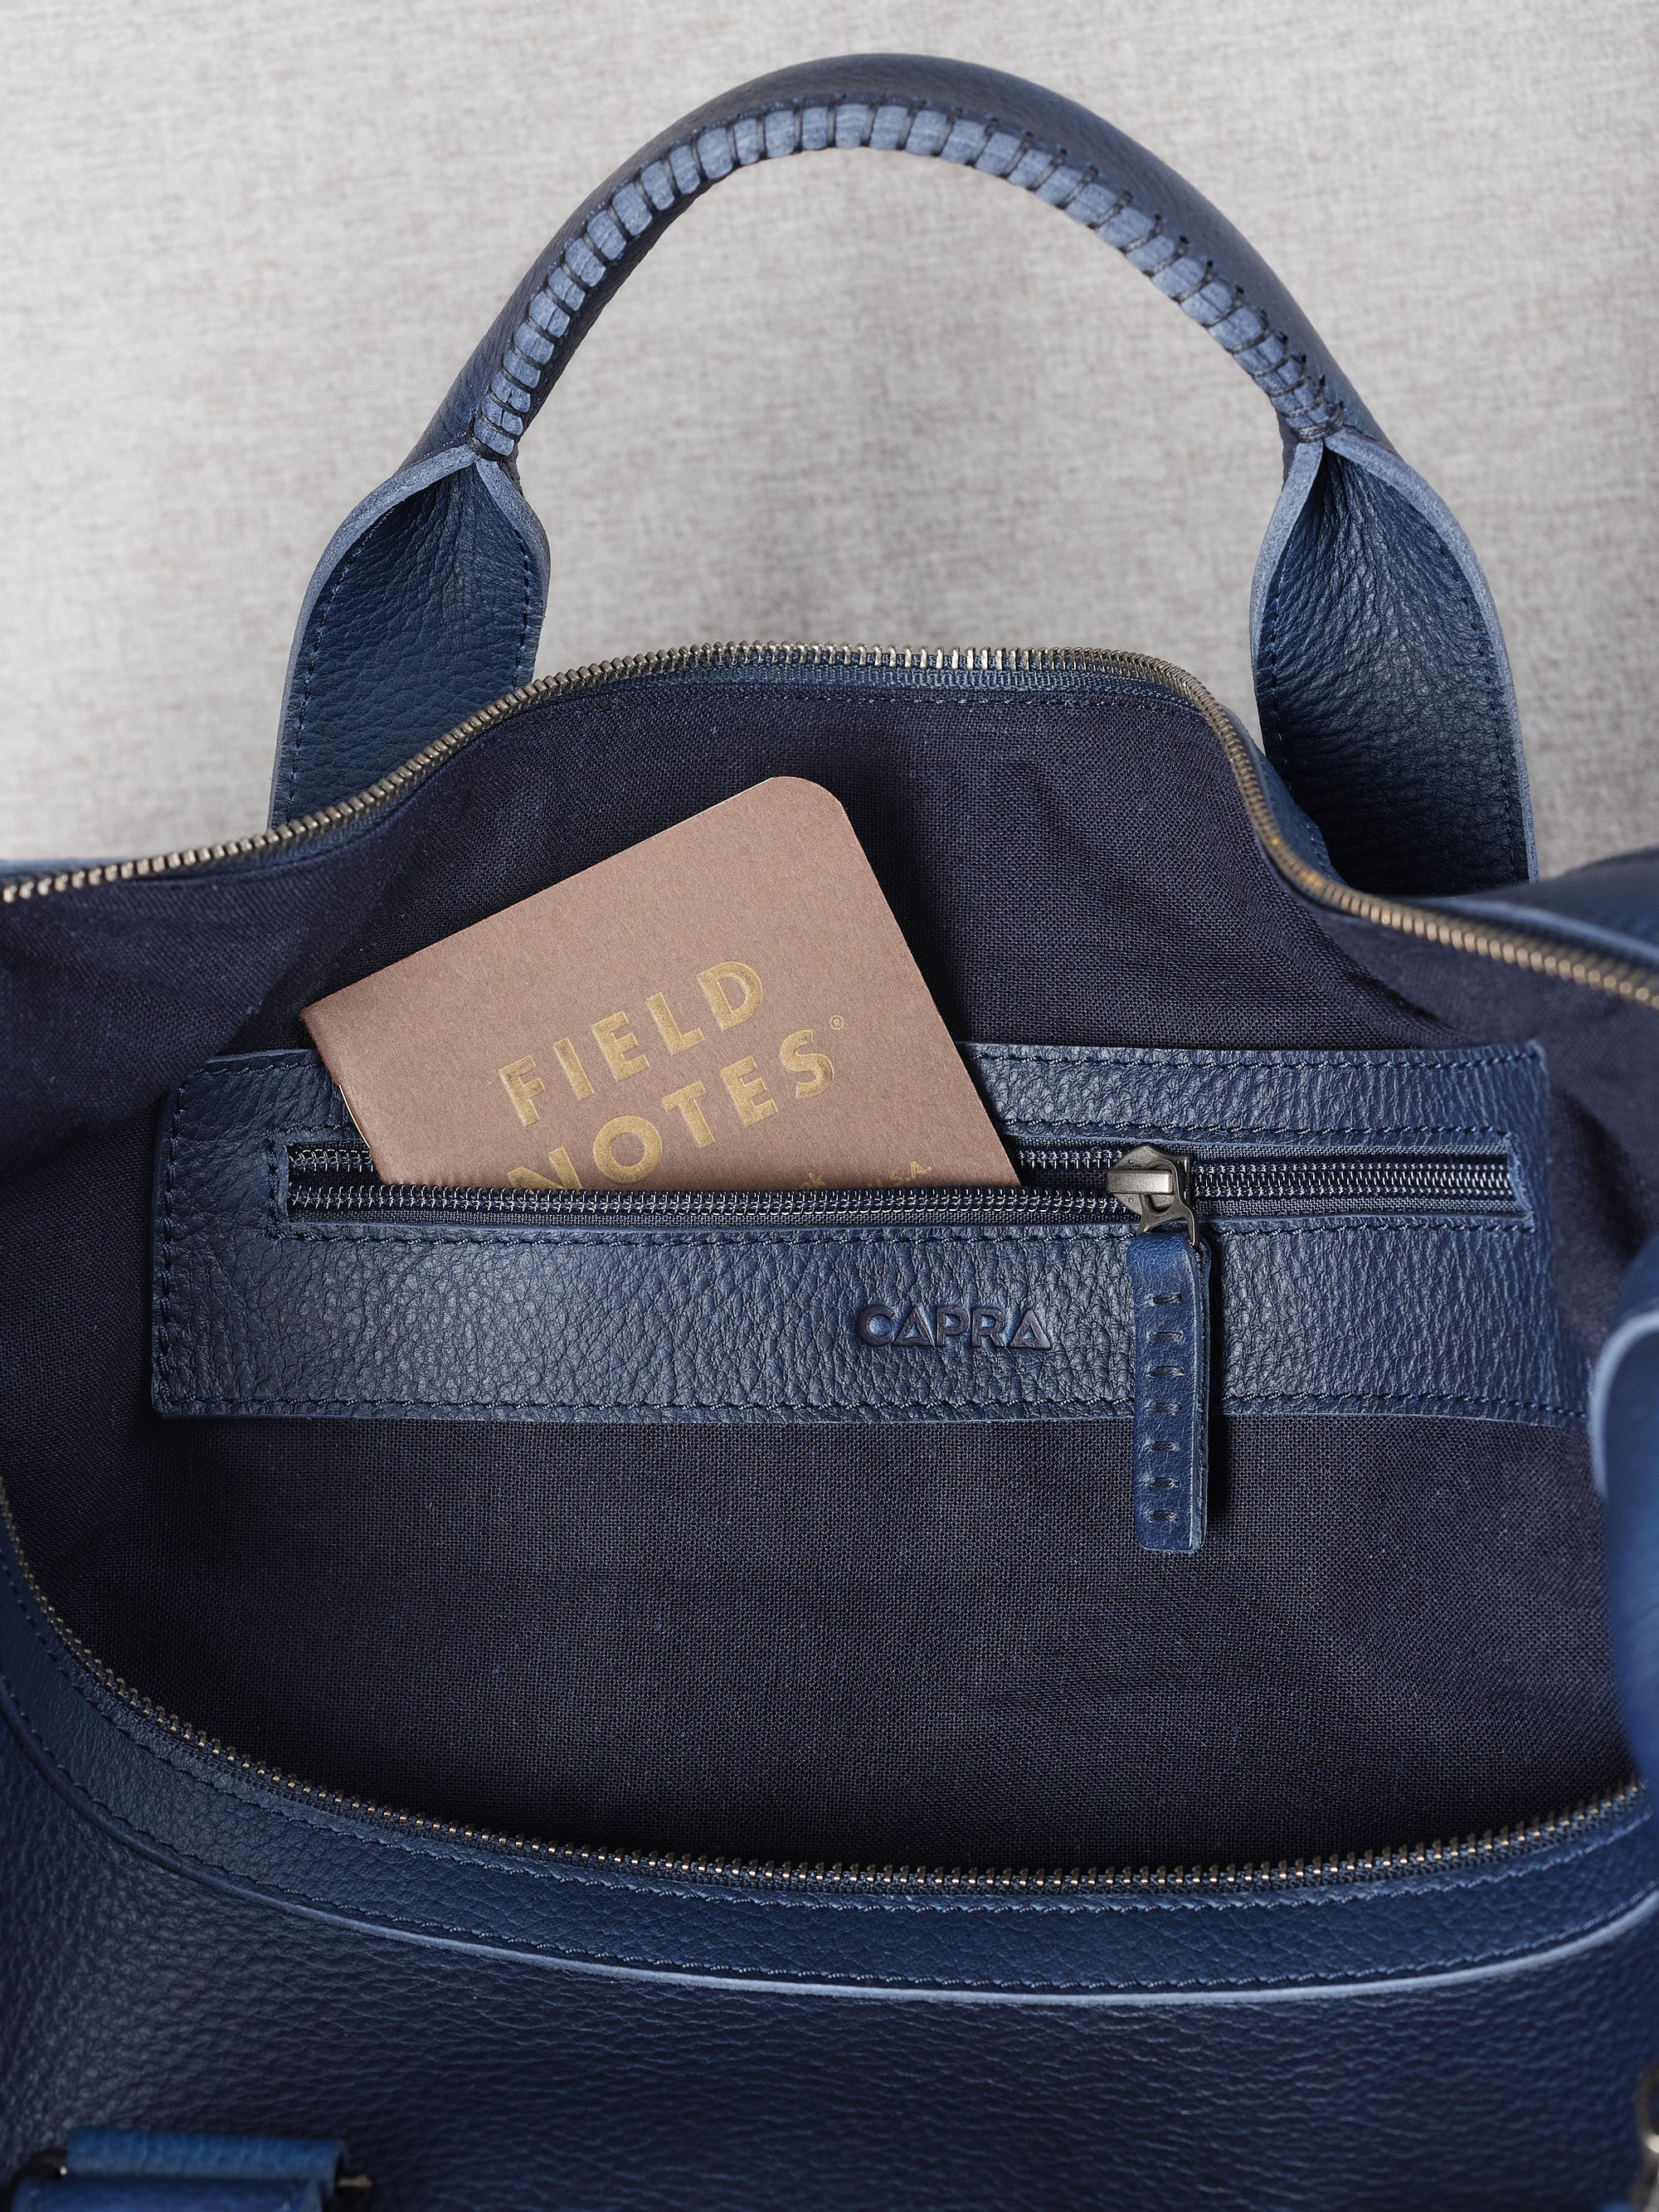 Interior pocket. Substantial Duffle Bag Navy by Capra Leather